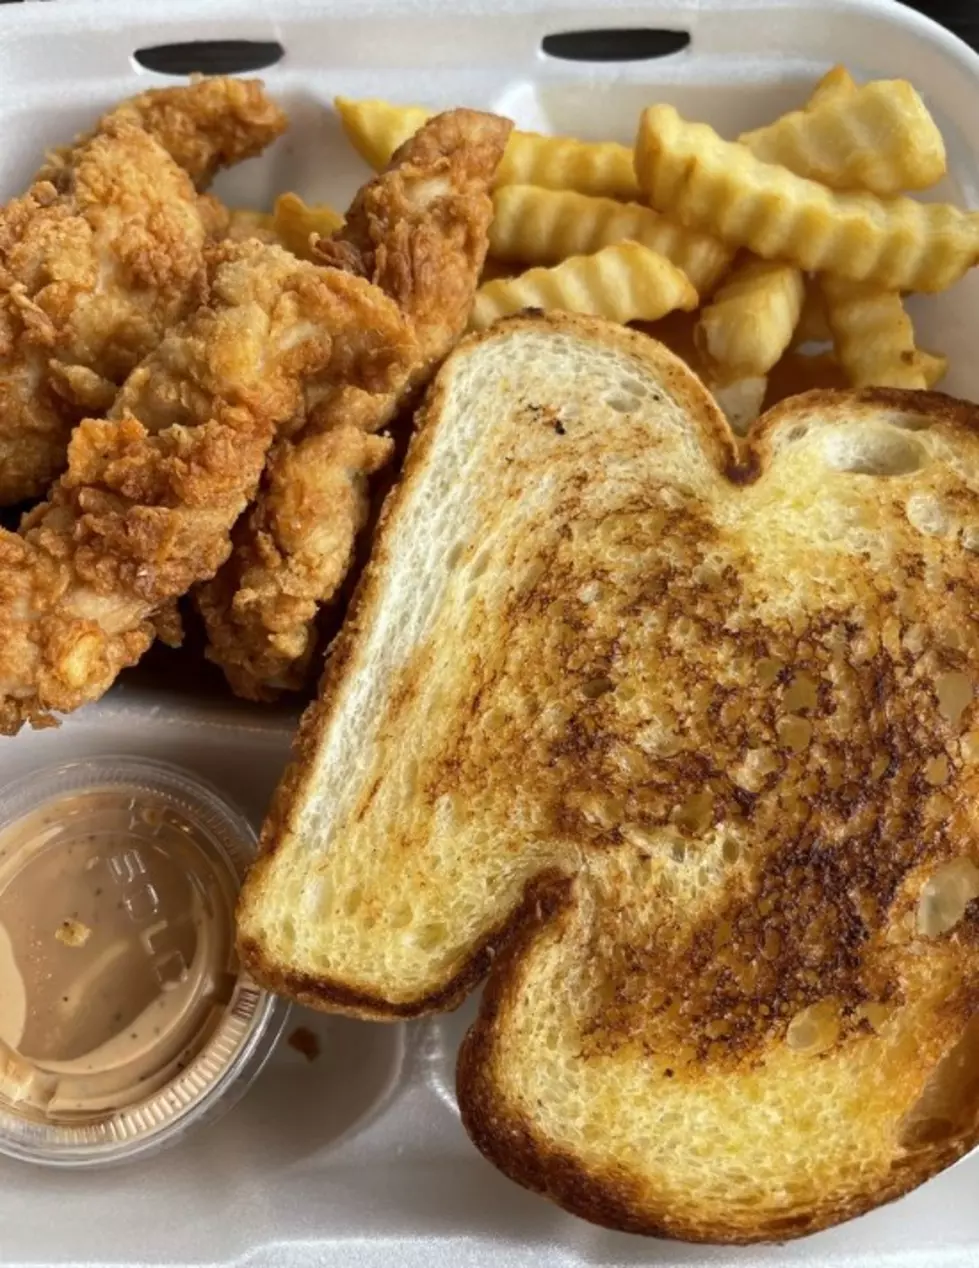 A Very Popular Chicken Finger Chain Will Be Coming To Boise